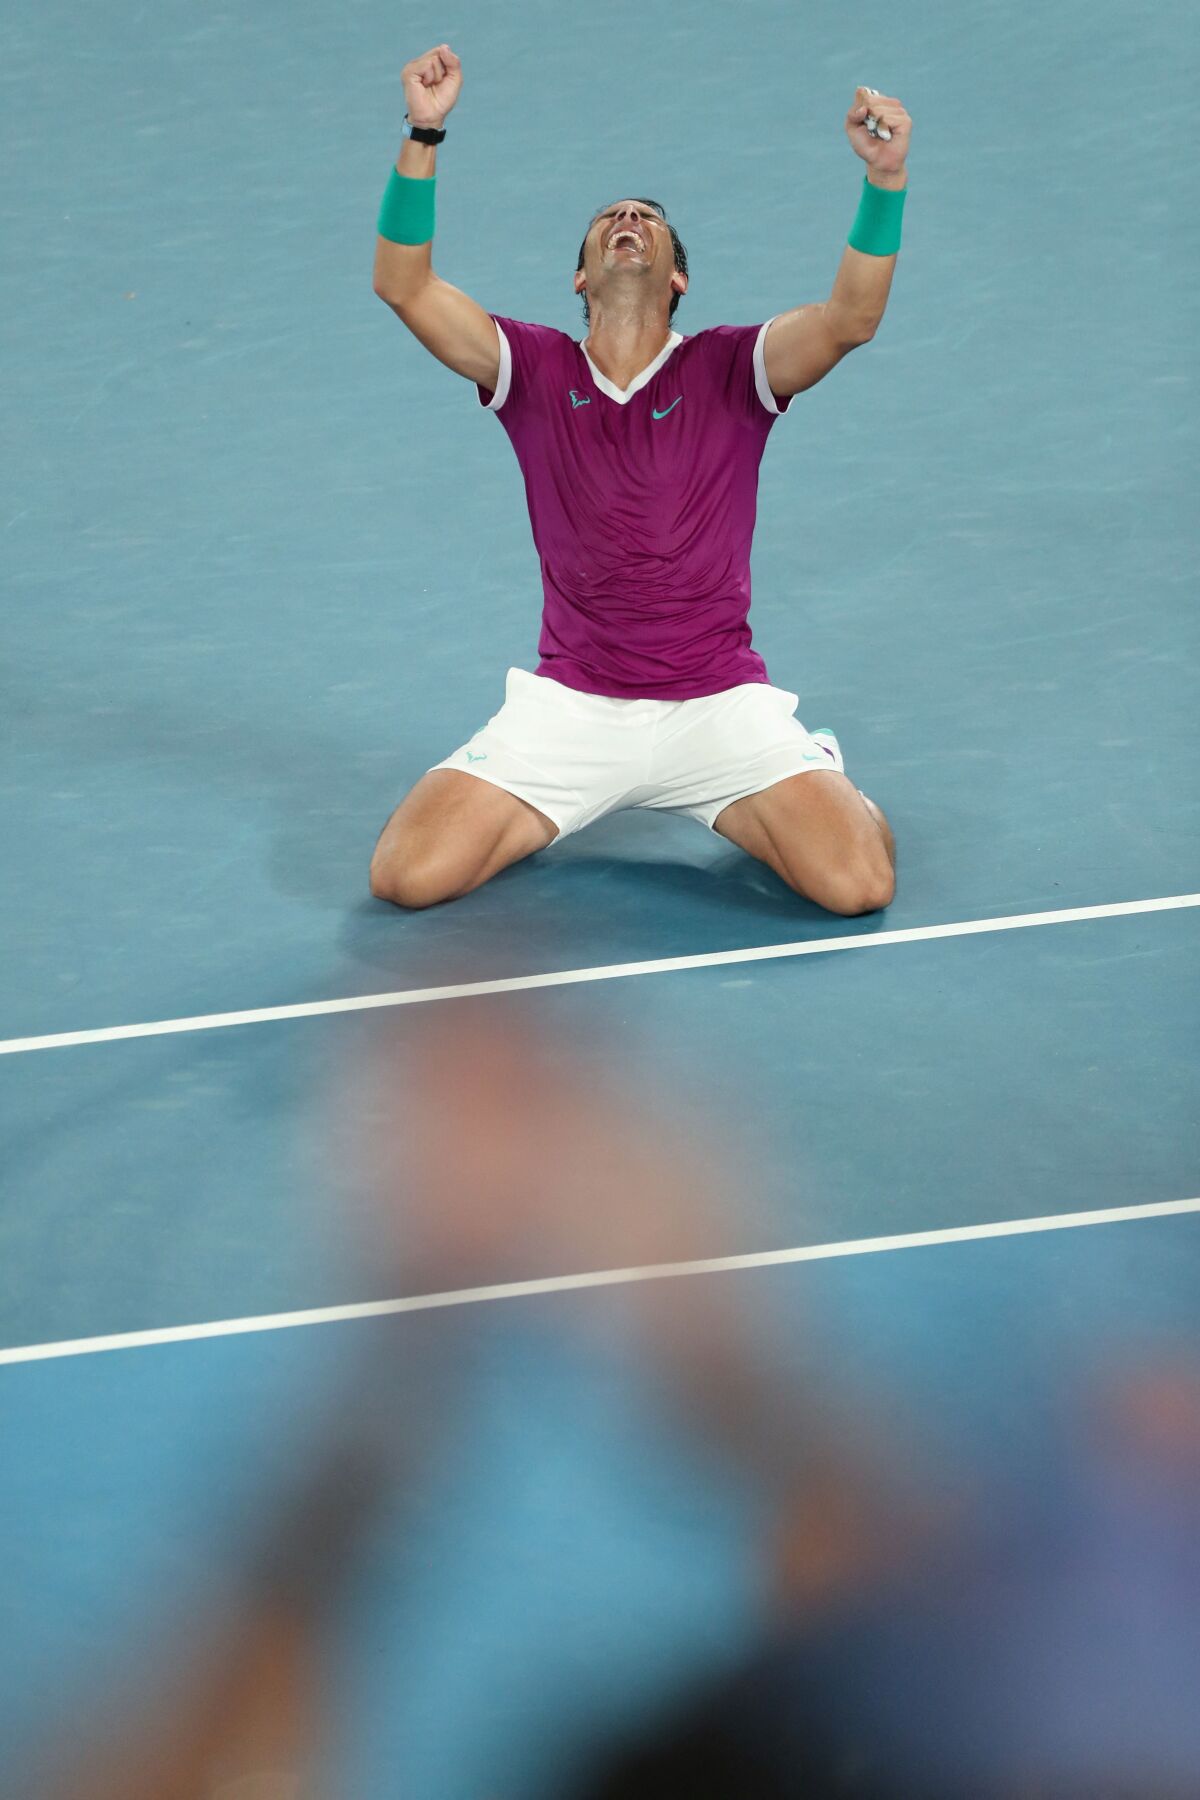 Rafael Nadal kneels on the tennis court after his win